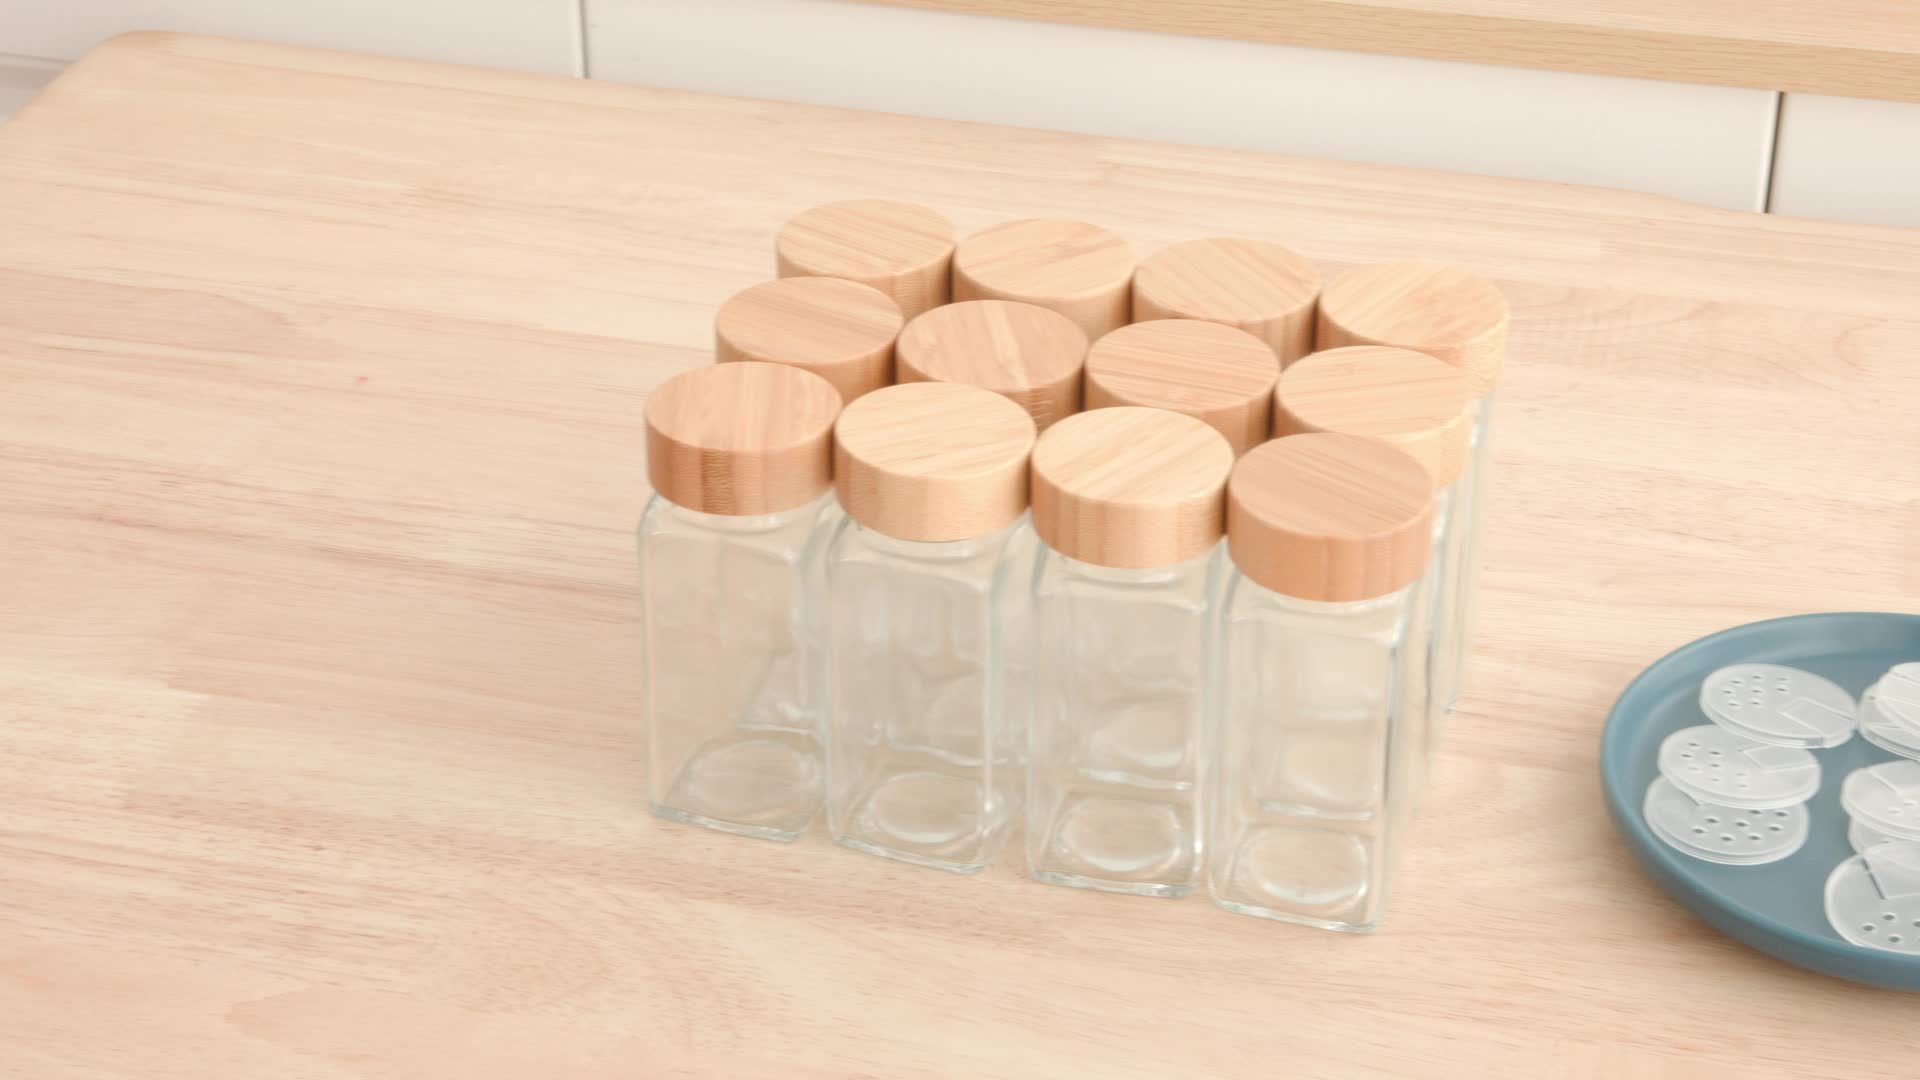 12pcs Spice Jars With Labels And Lids, 4oz Empty Square Spice Bottles With  Collapsible Funnel, Glass Condiment Containers, Kitchen Accessaries, Kitche